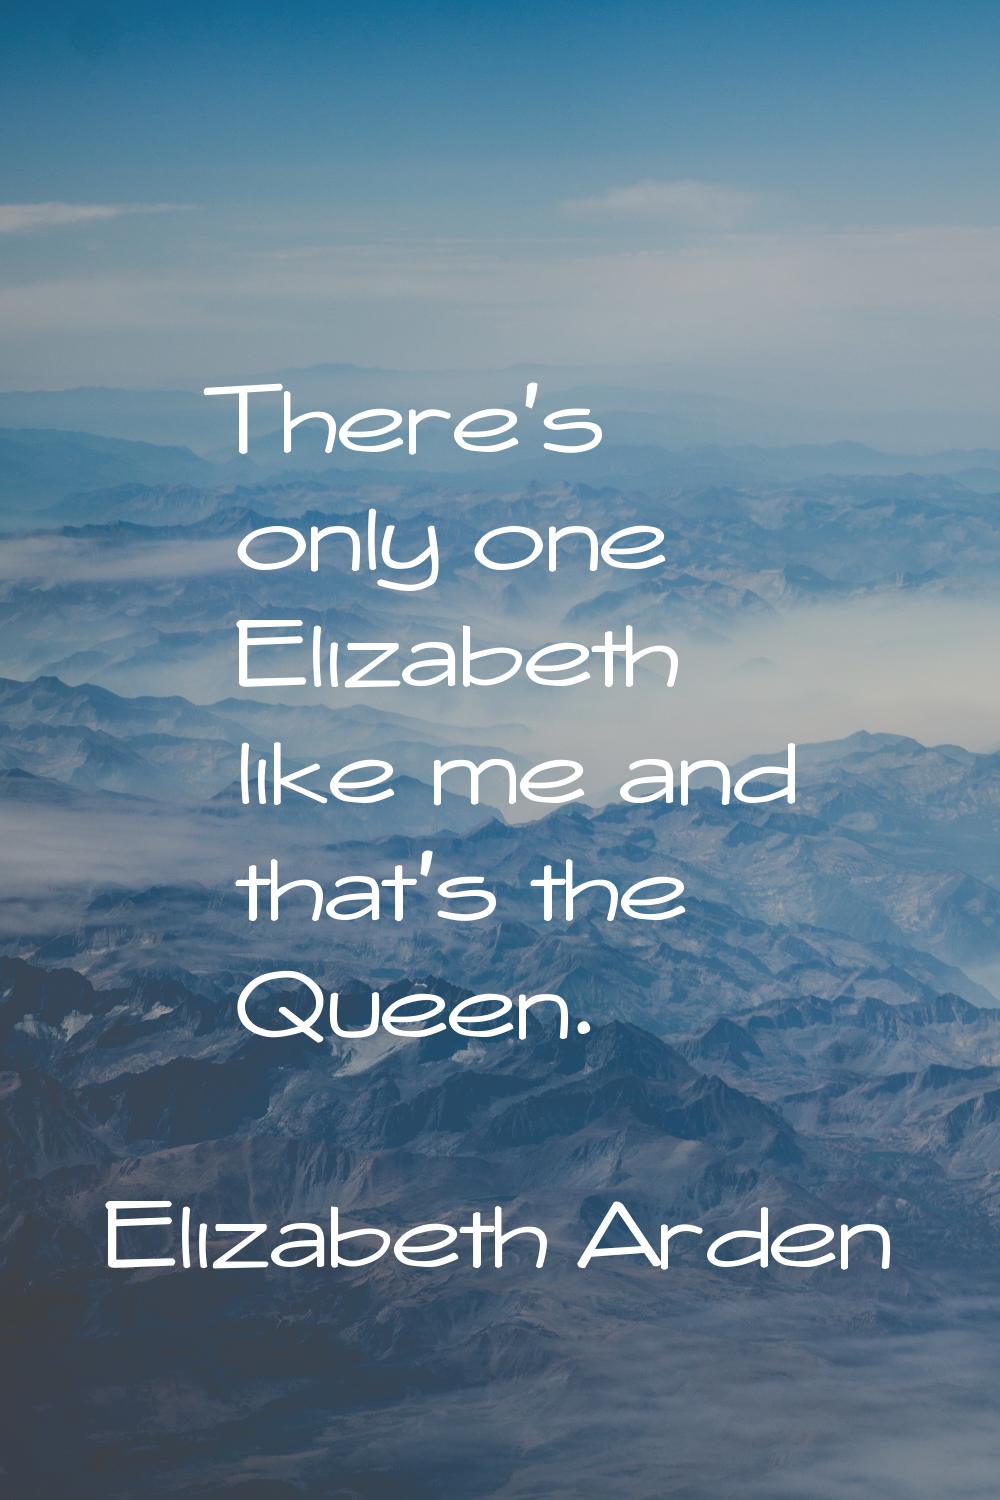 There's only one Elizabeth like me and that's the Queen.